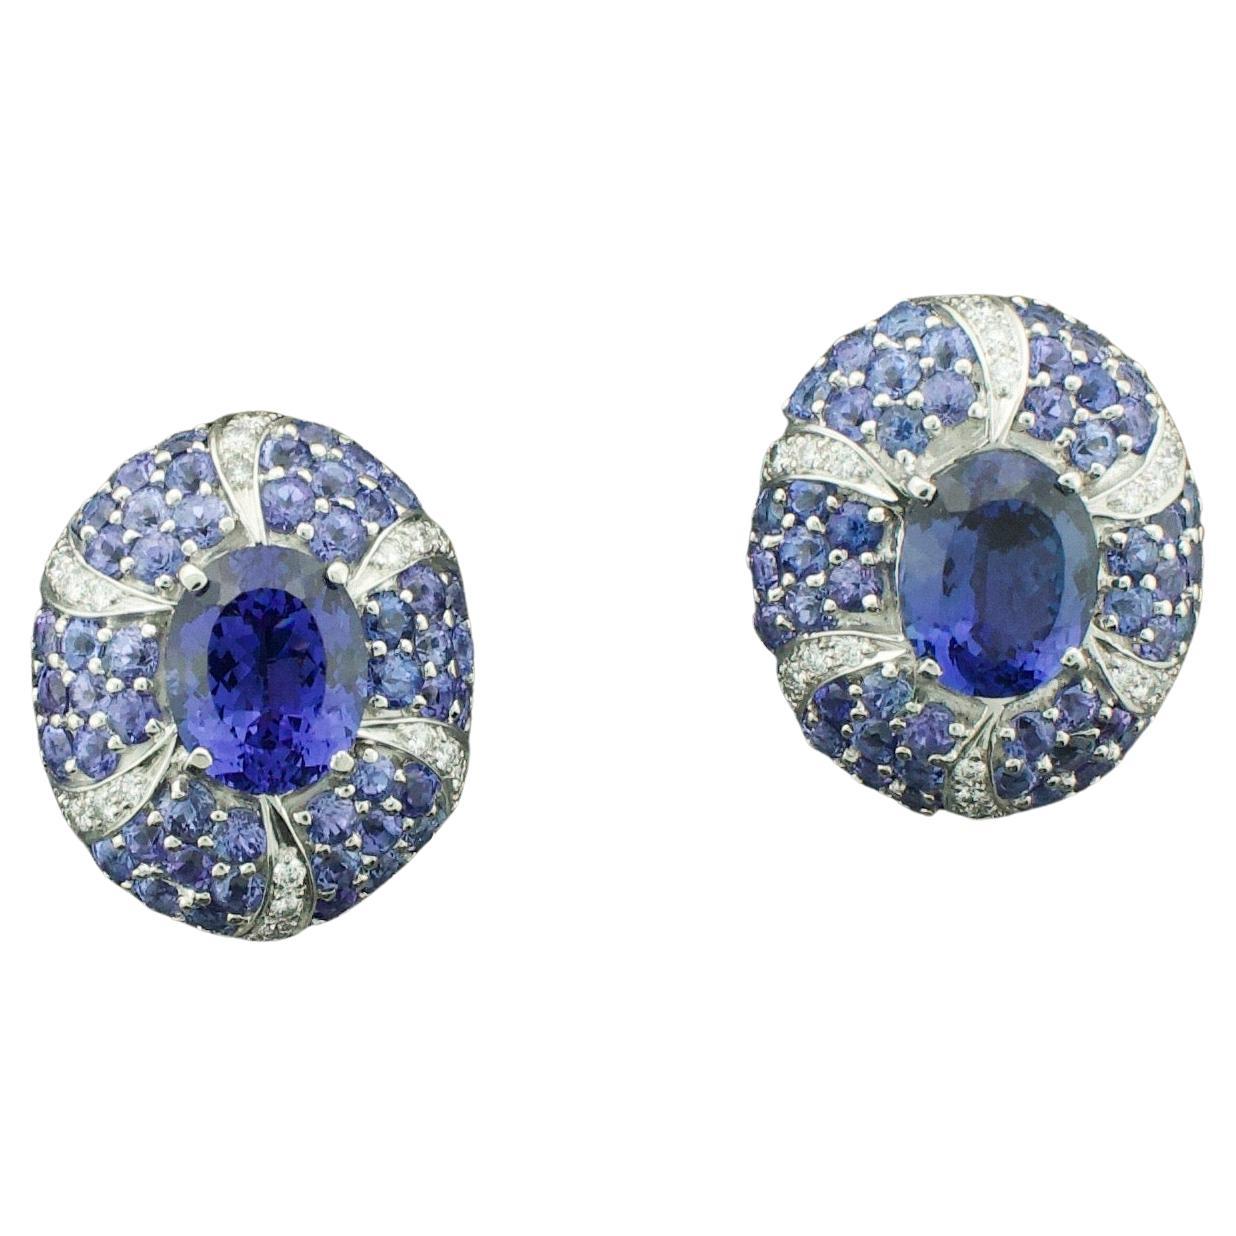 Substantial Tanzanite and Diamond Earrings in 18k Gold 